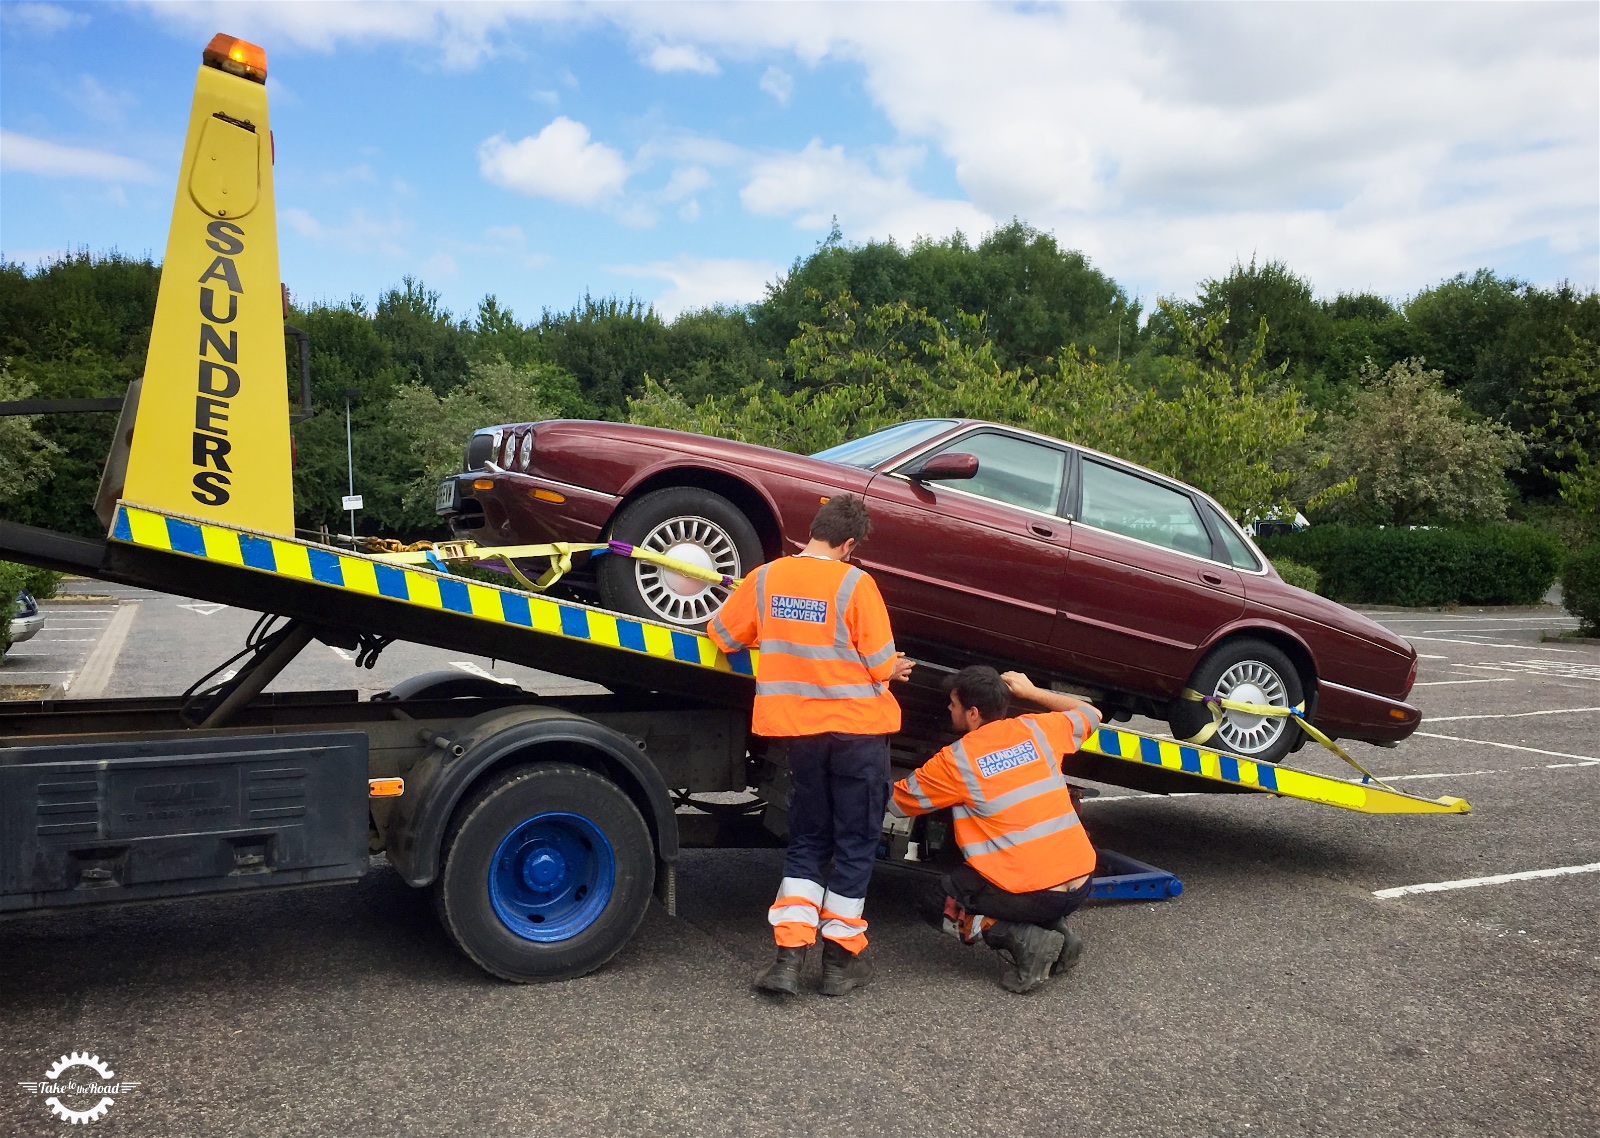 What to do if your classic car breaks down